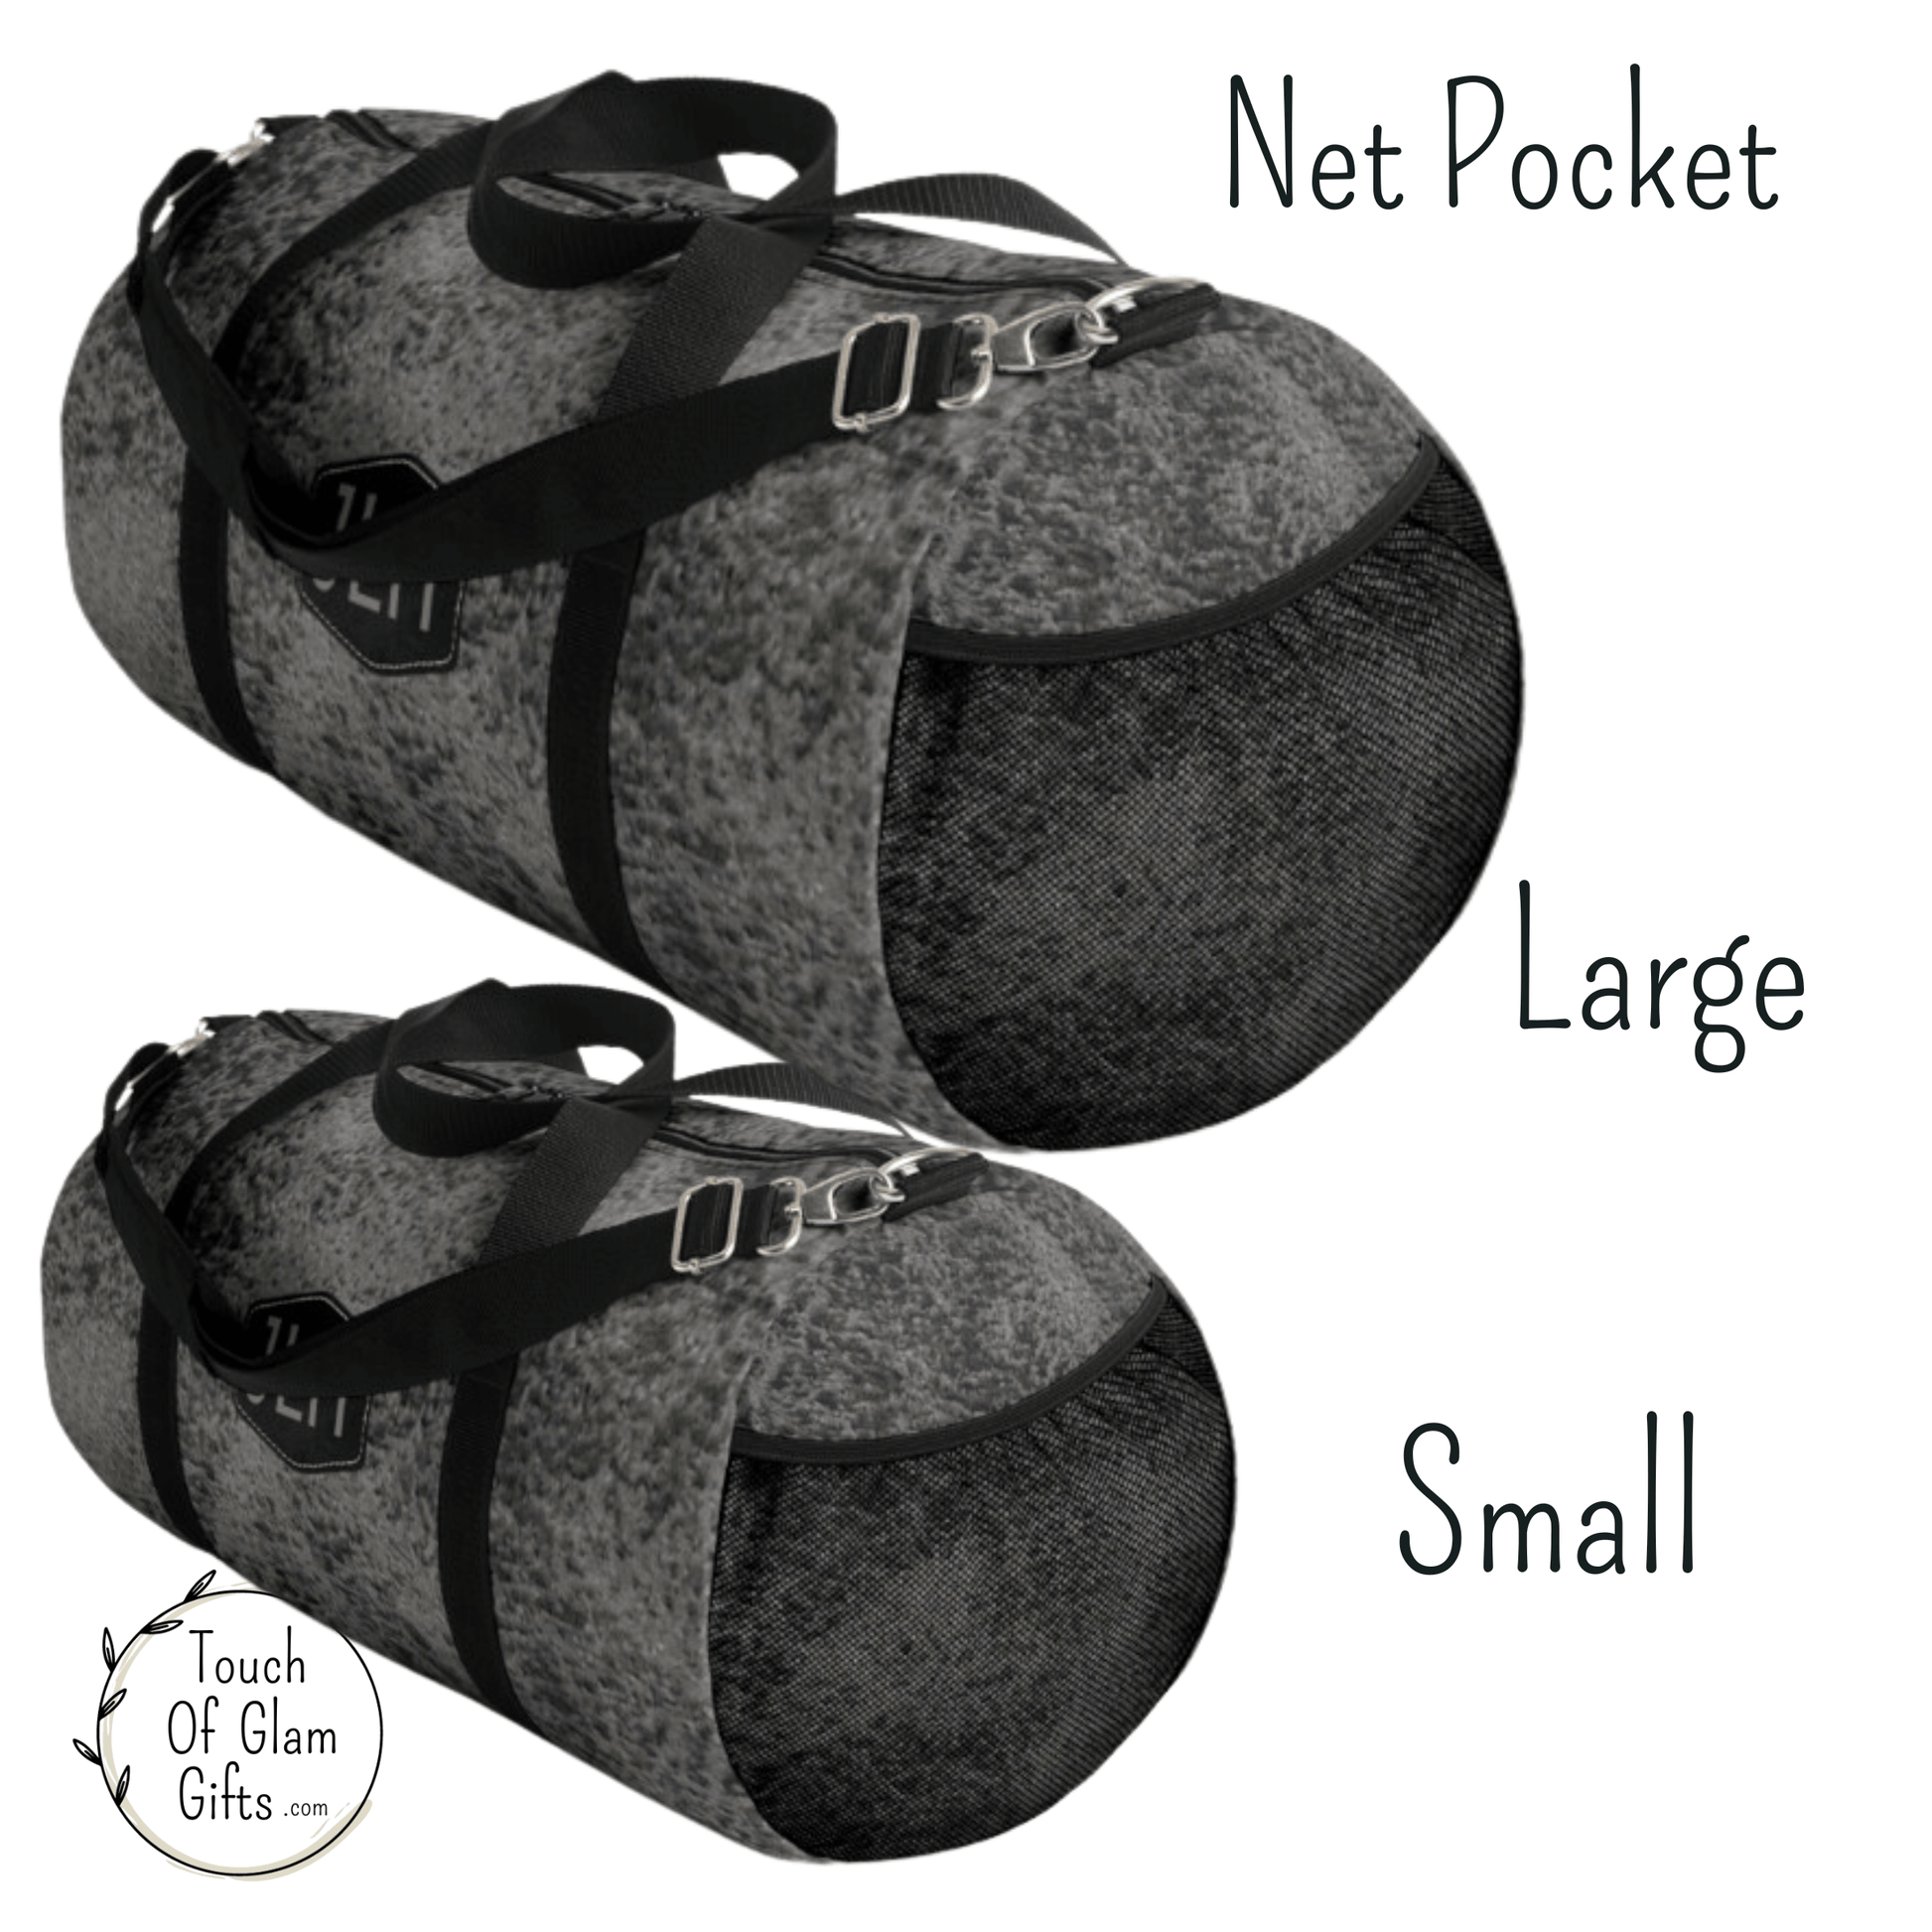 both the large and small duffel bag for guys has a net pocket on one side for extra storage. These quality built duffel bags make the perfect personalized gift for guys.